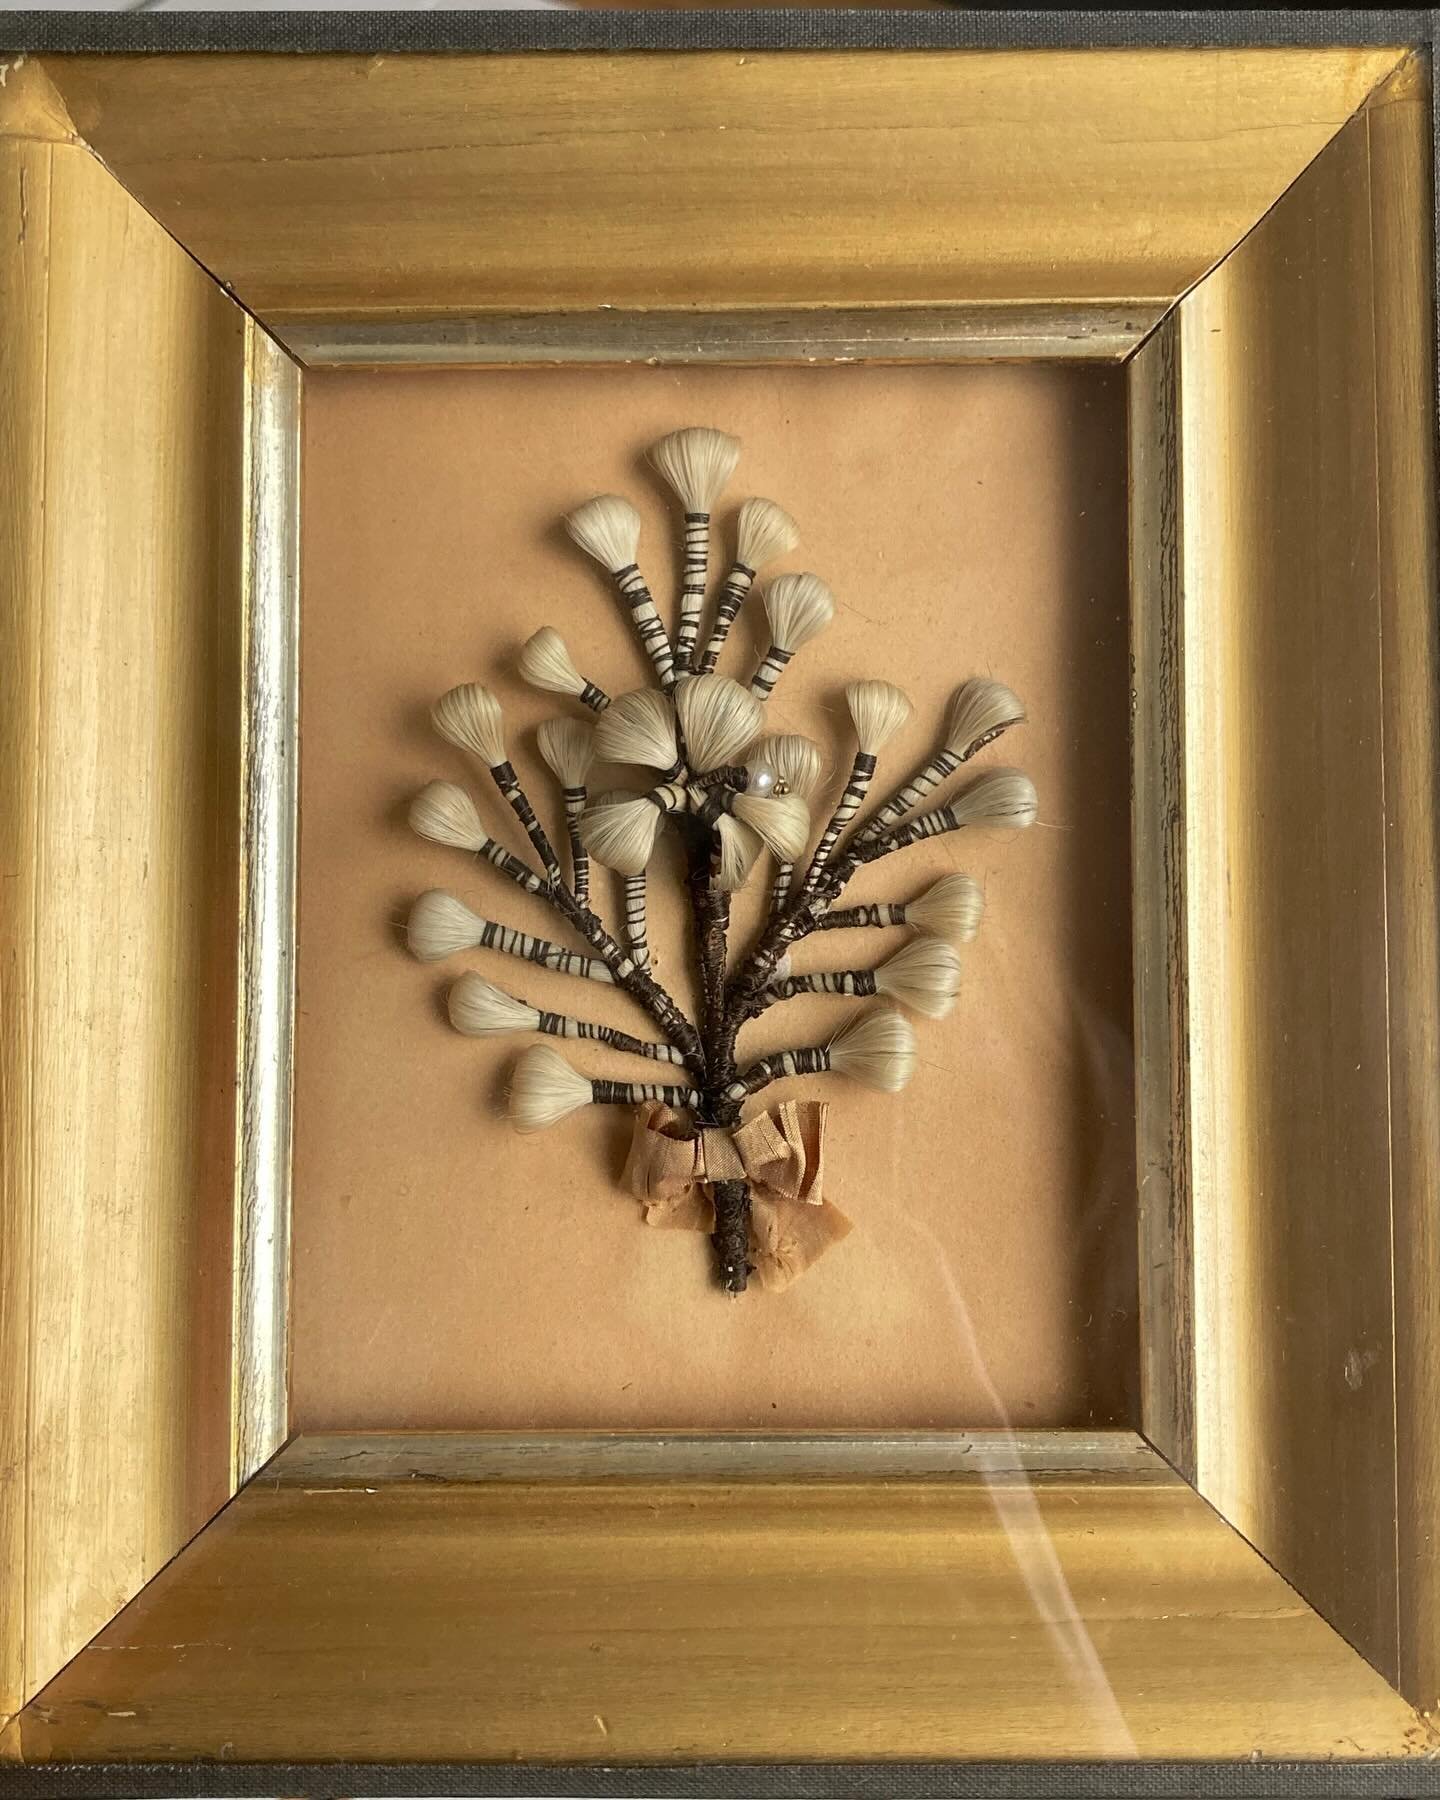 Today&rsquo;s crazy beautiful treasure find from my local antique shop. A (possibly more than) 100 year old Danish hair work piece - also known as &ldquo;h&aring;rarbejde&rdquo; in Danish or &ldquo;h&aring;rabete&rdquo; in Swedish) that used to belon